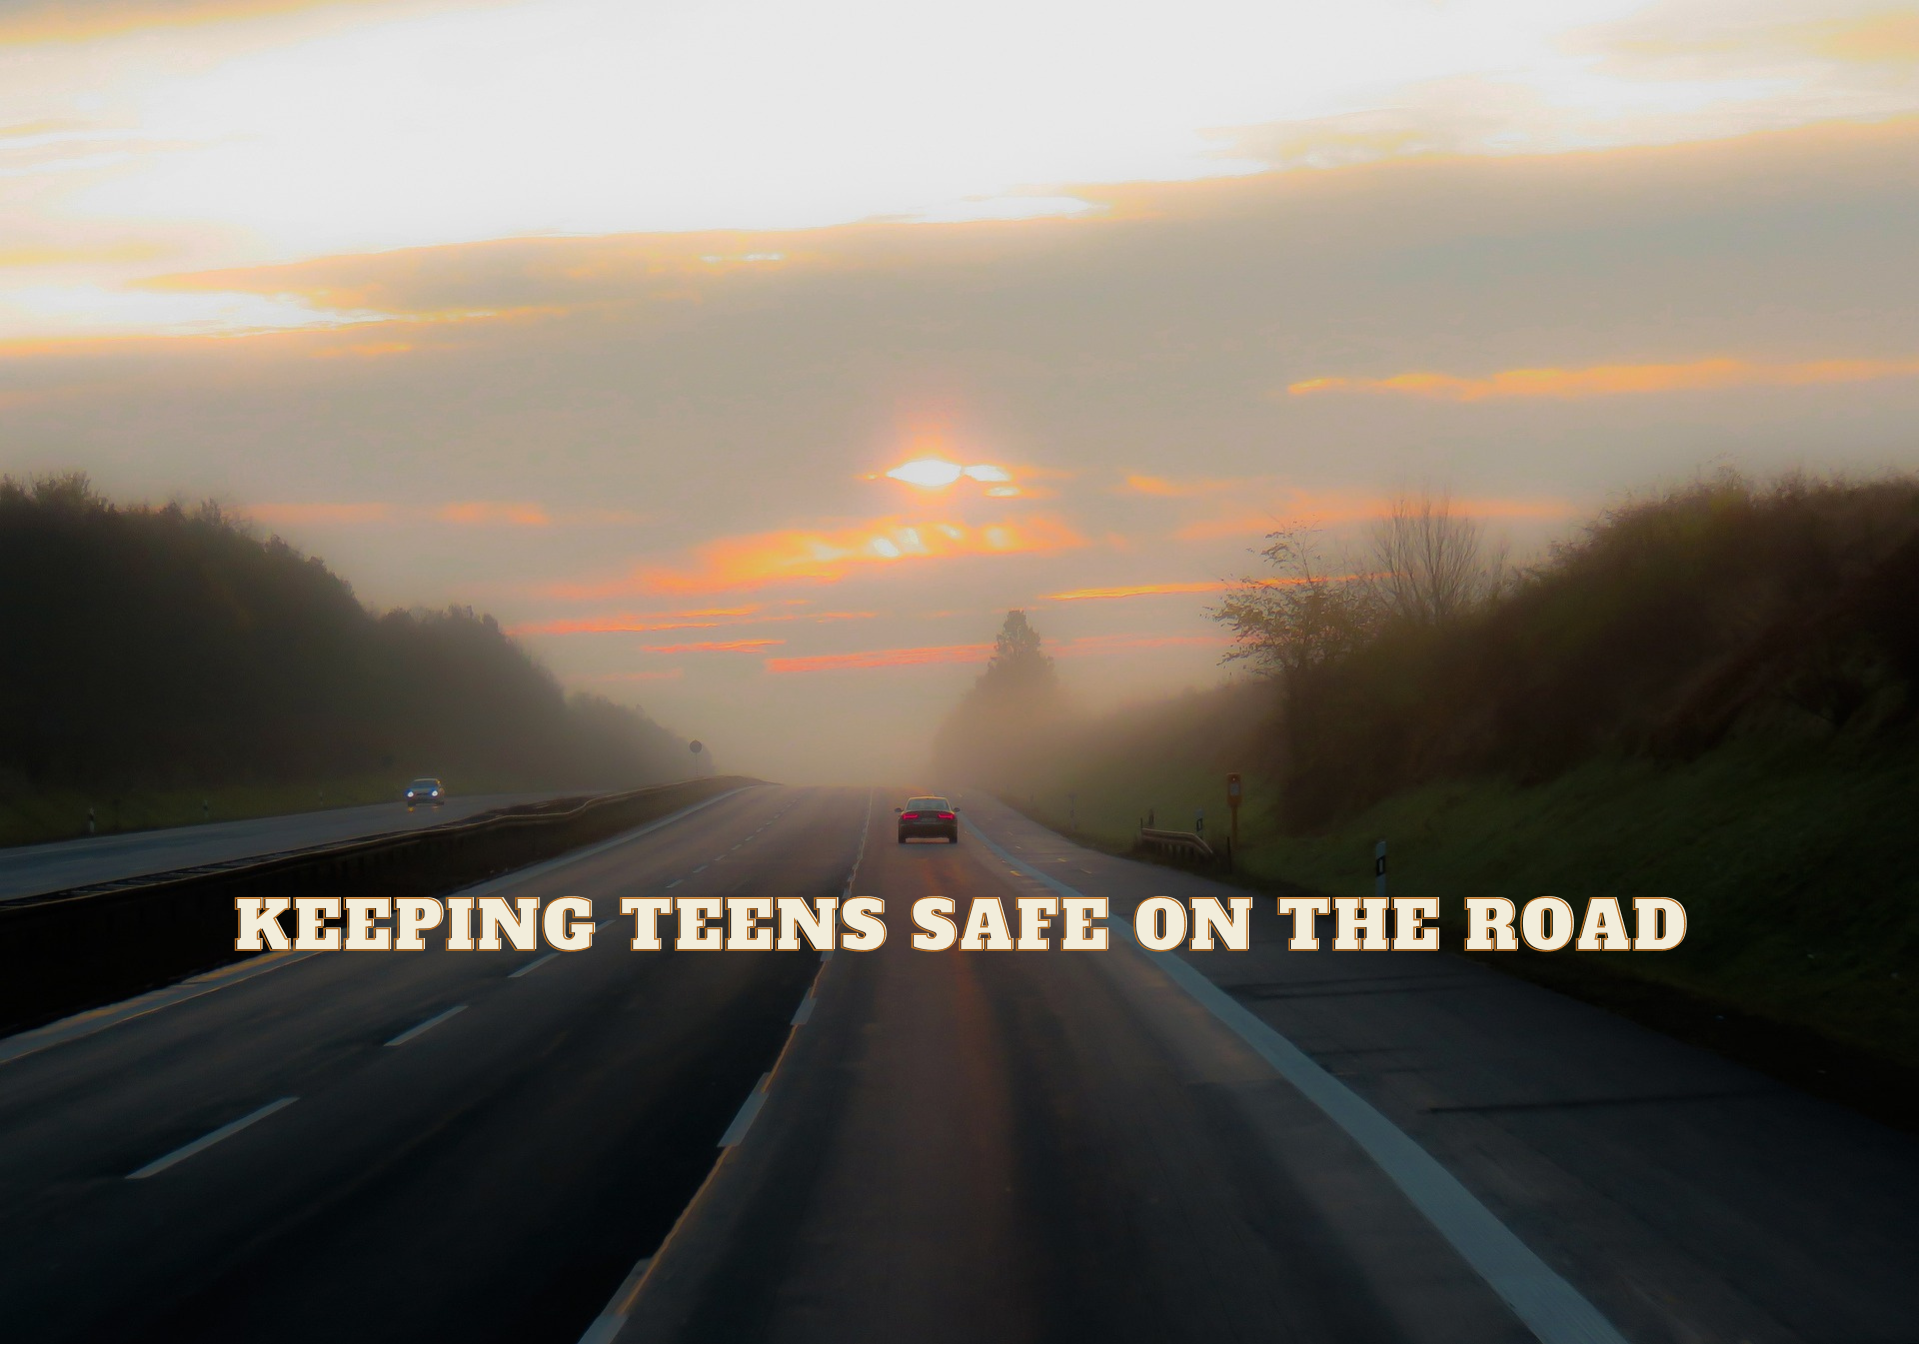 Keeping Teens Safe on the Road